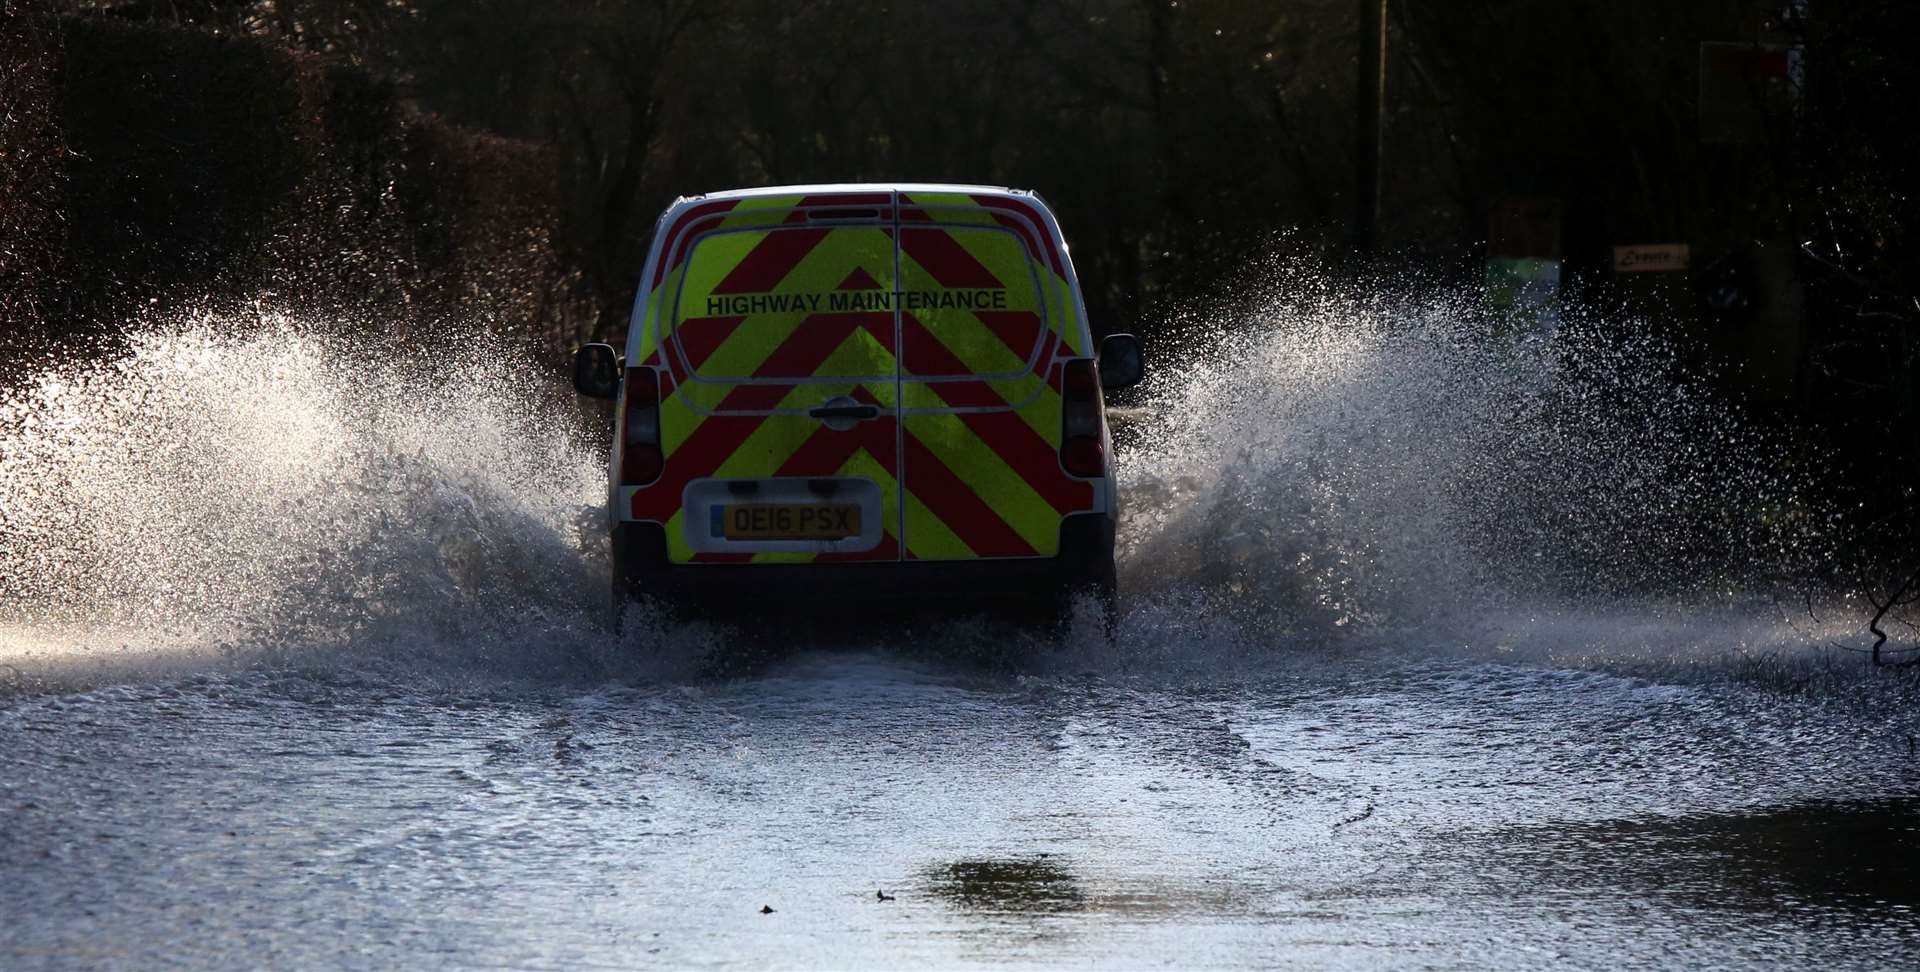 New Barn Road in Hawkenbury has shut because of flooding near Staplehurst. Picture: UK News in Pictures (26827699)